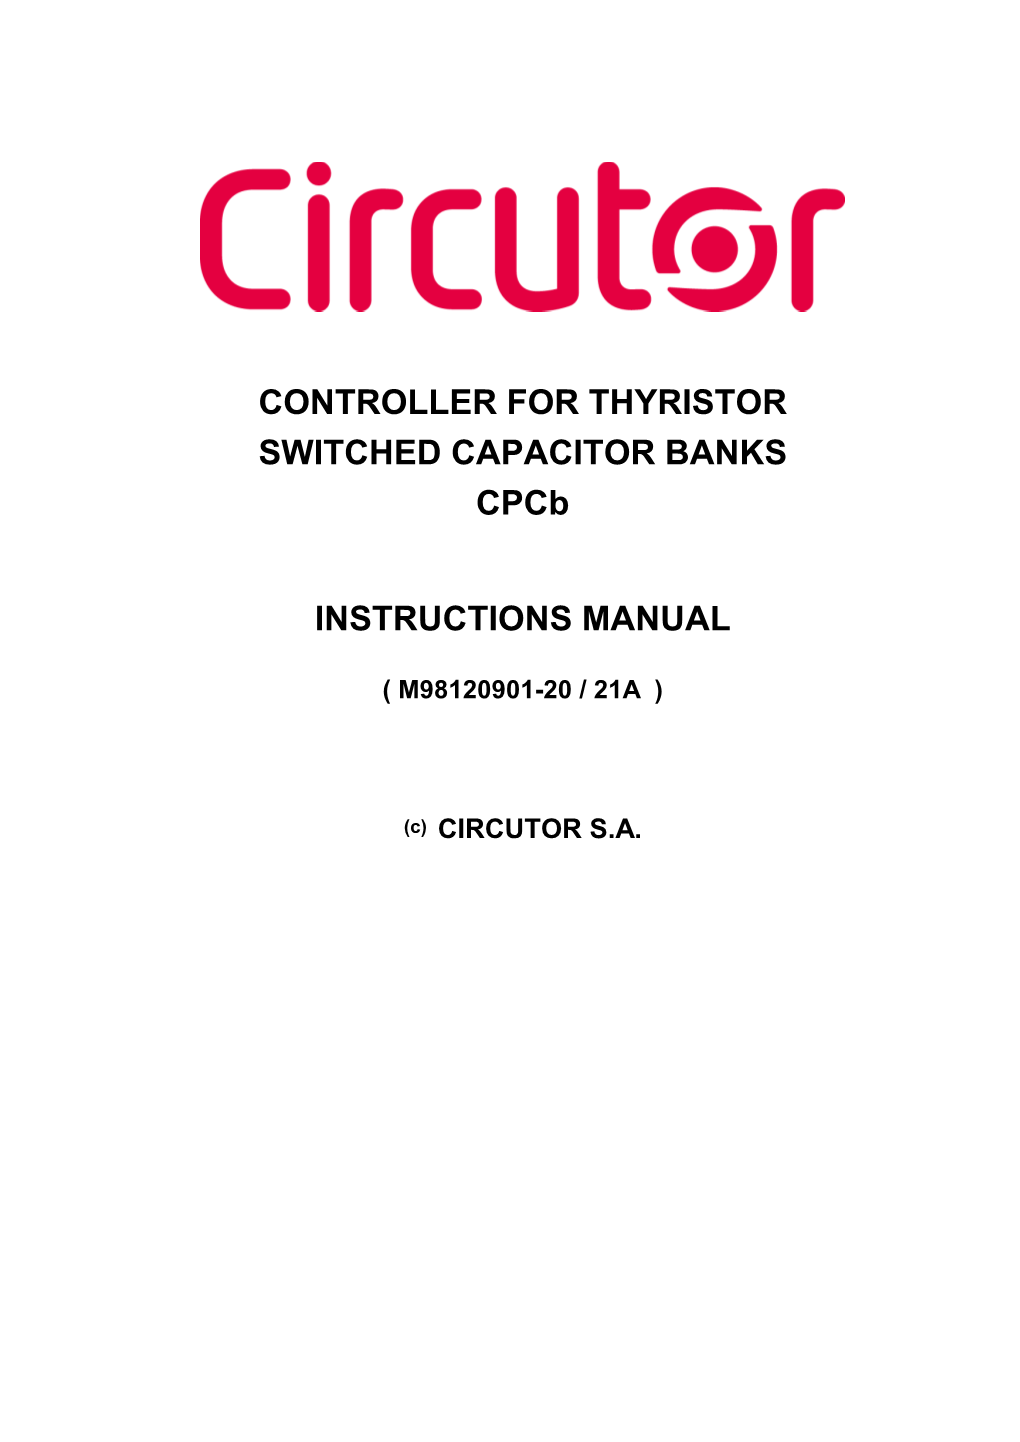 CONTROLLER for THYRISTOR SWITCHED CAPACITOR BANKS Cpcb INSTRUCTIONS MANUAL